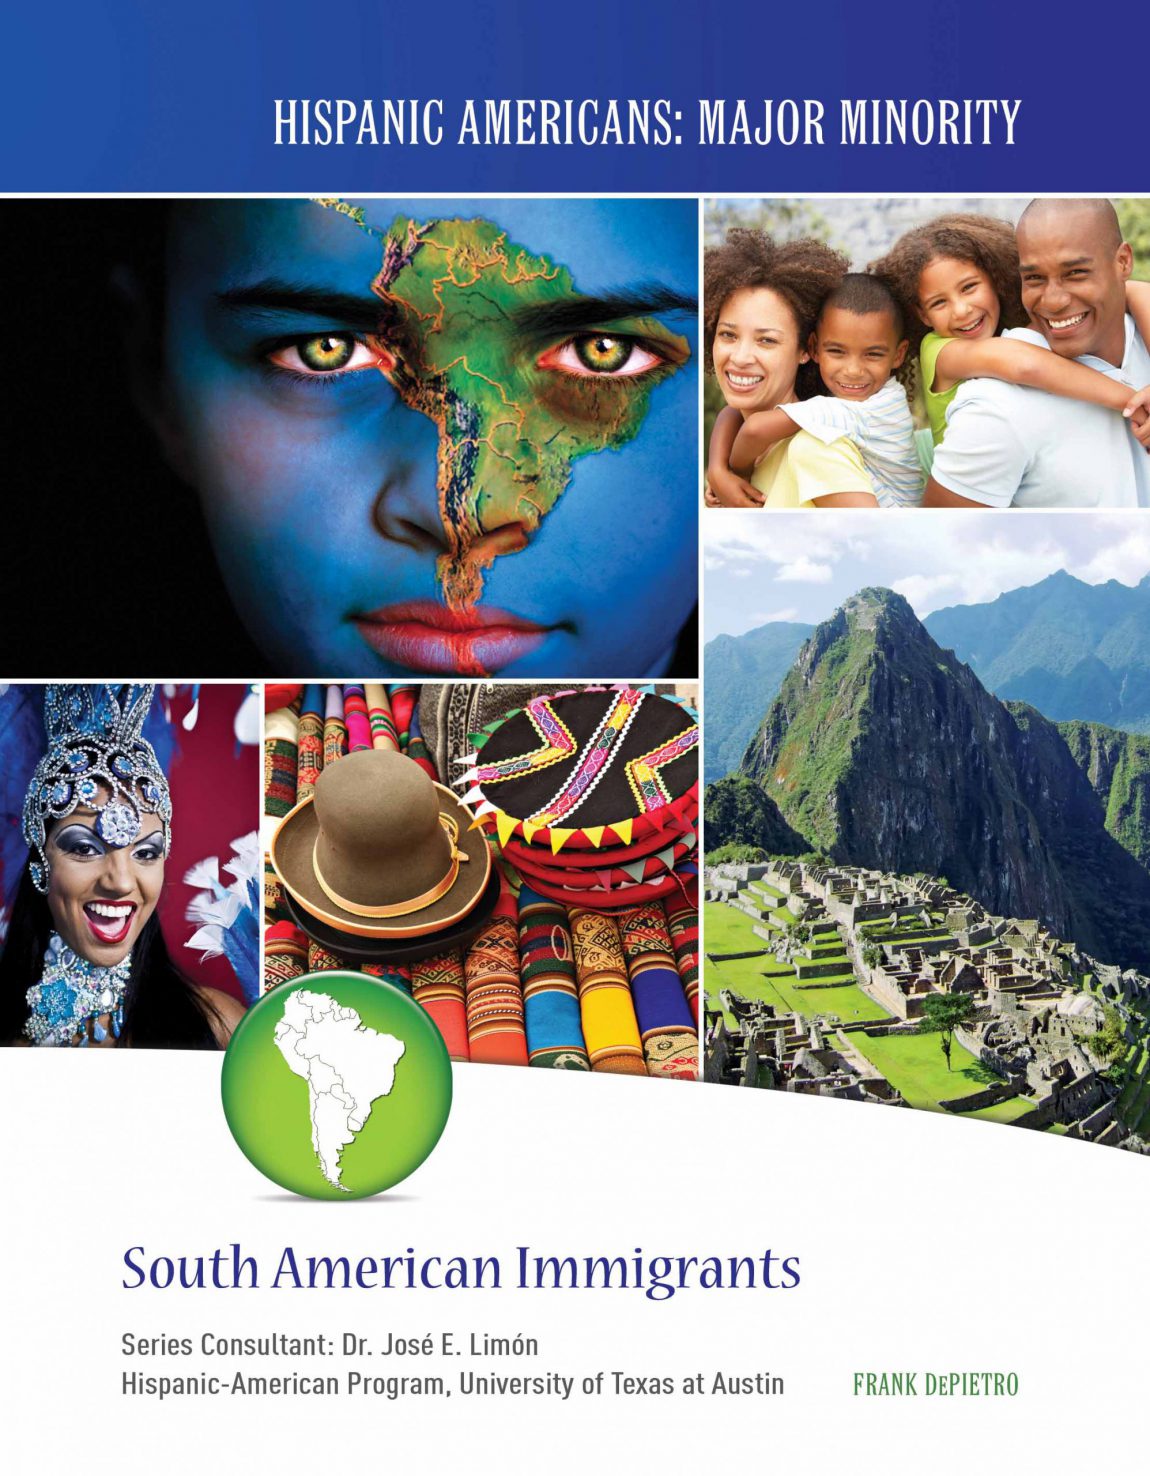 South-American-Immigrants-scaled.jpg